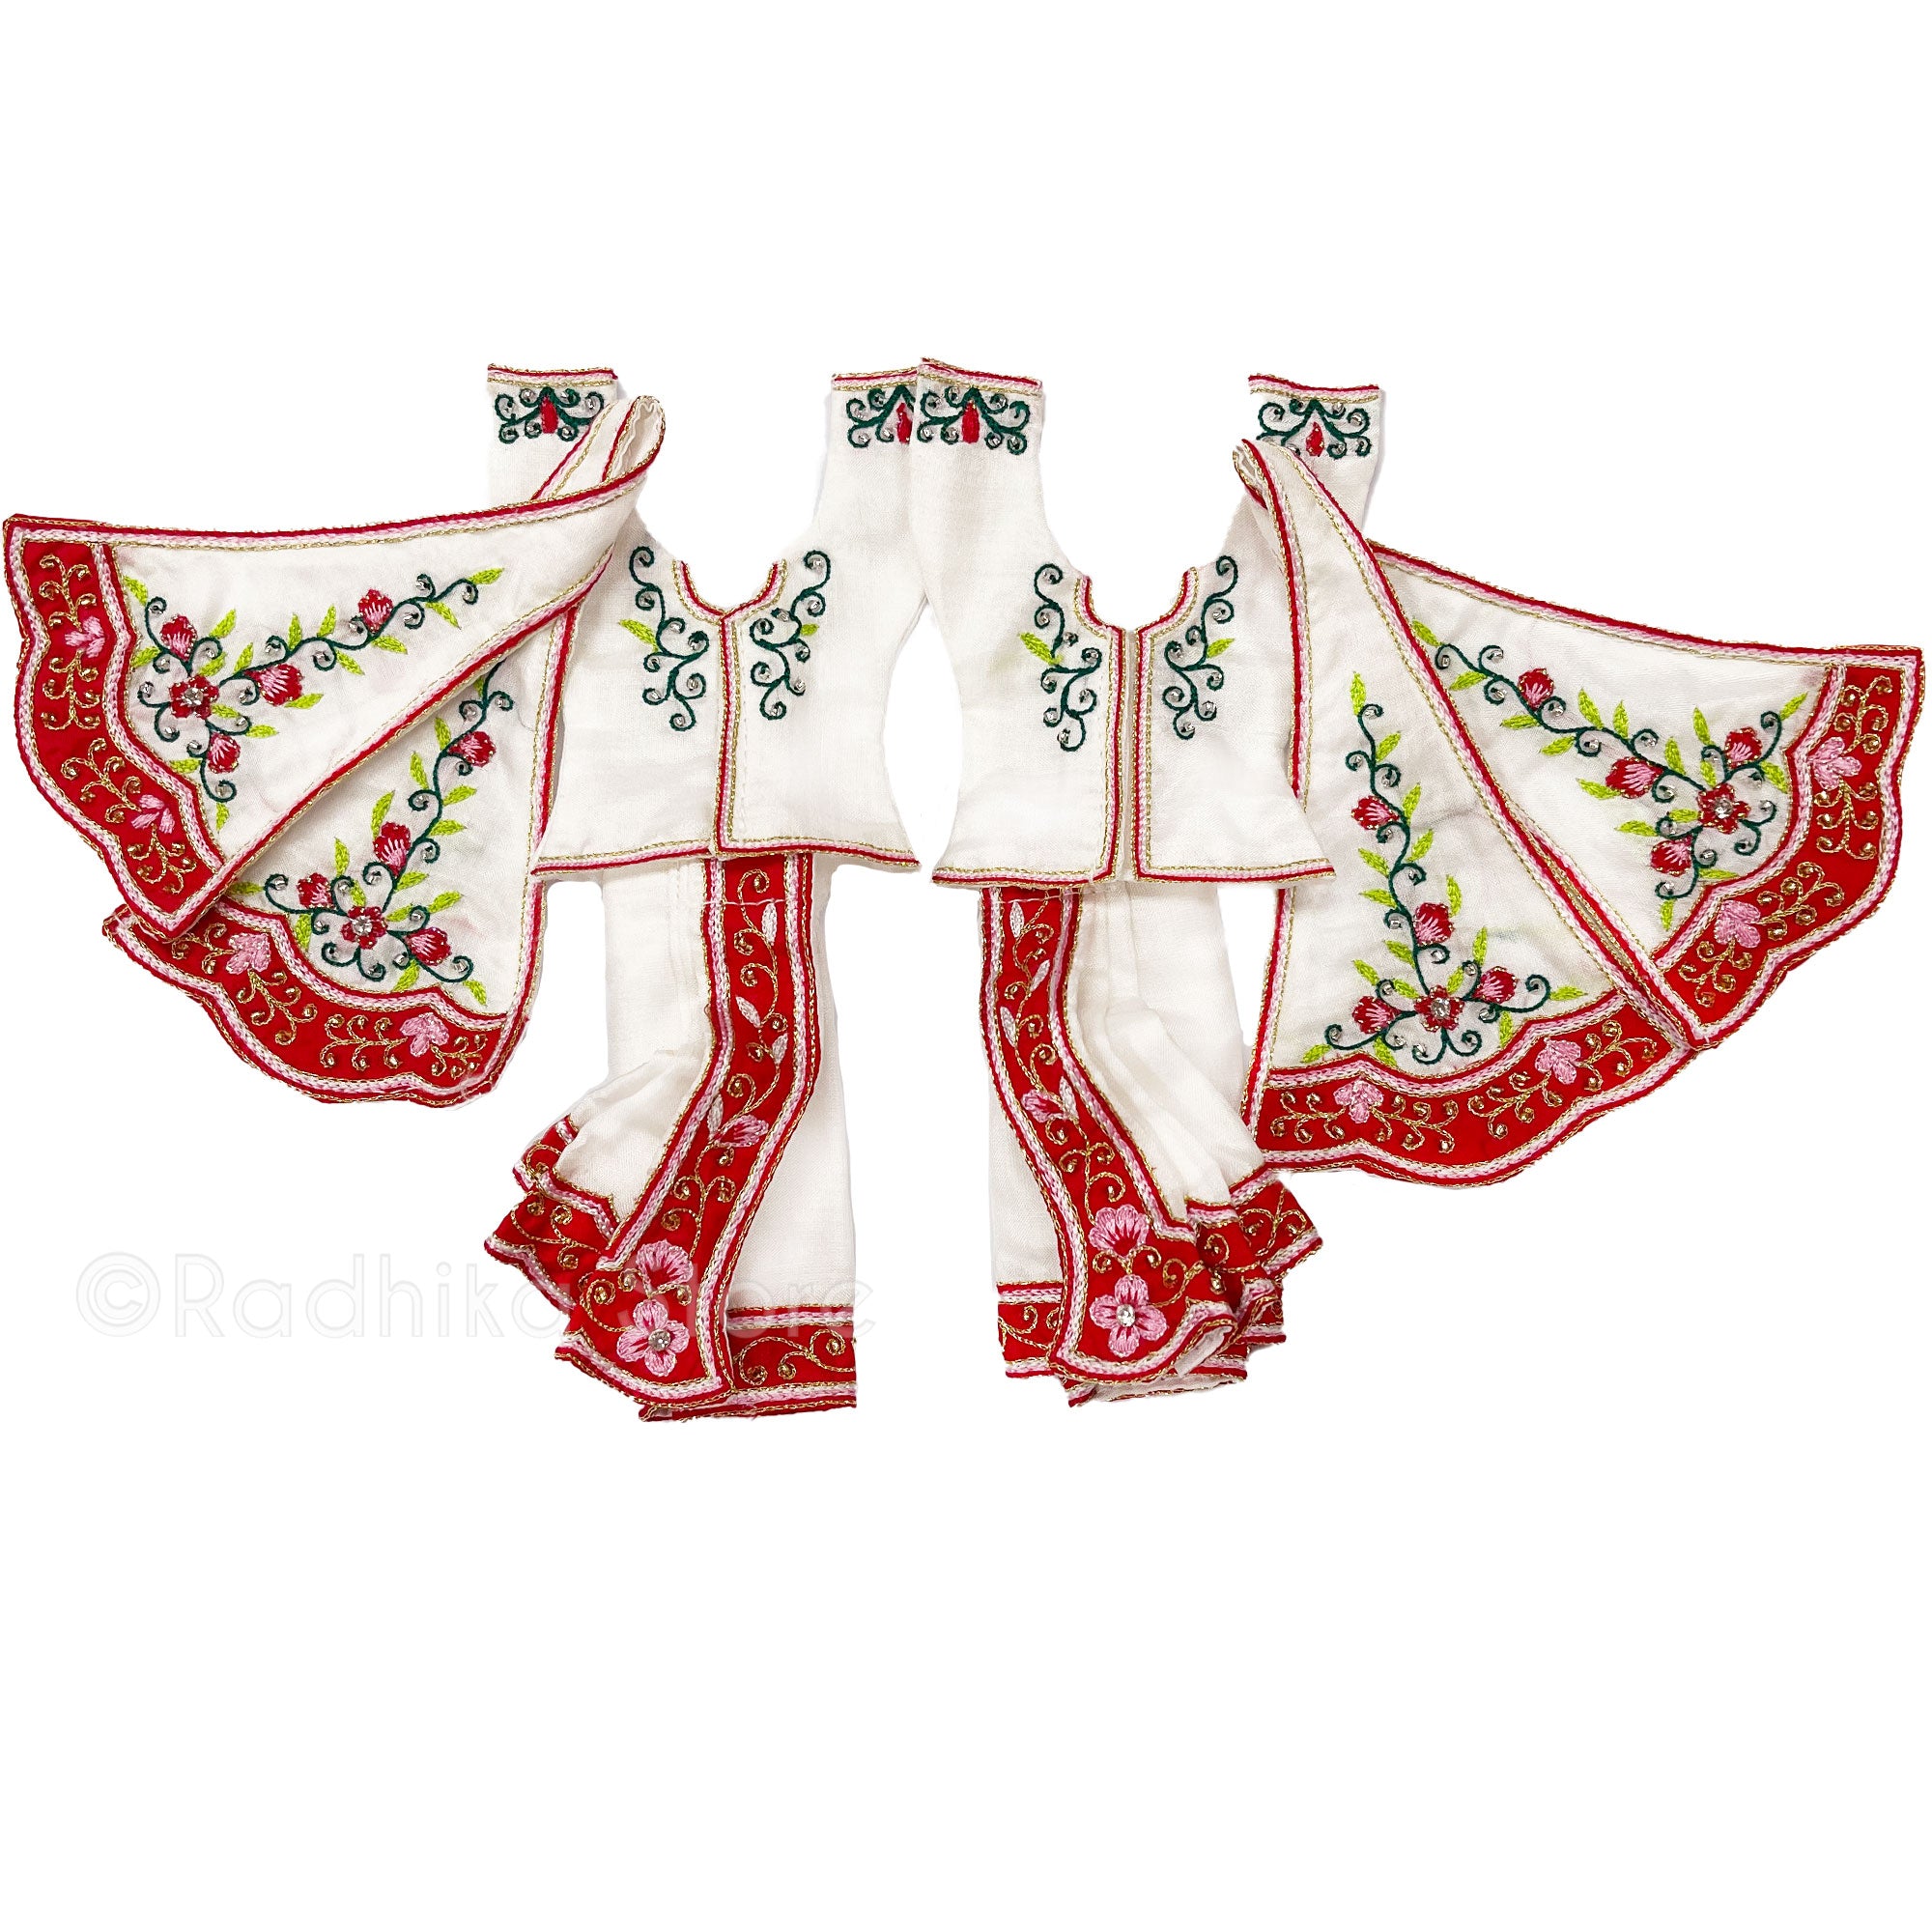 Madhuram - All Silk -White with Red-Pink-Green and Gold - Gaura Nitai Deity Outfit